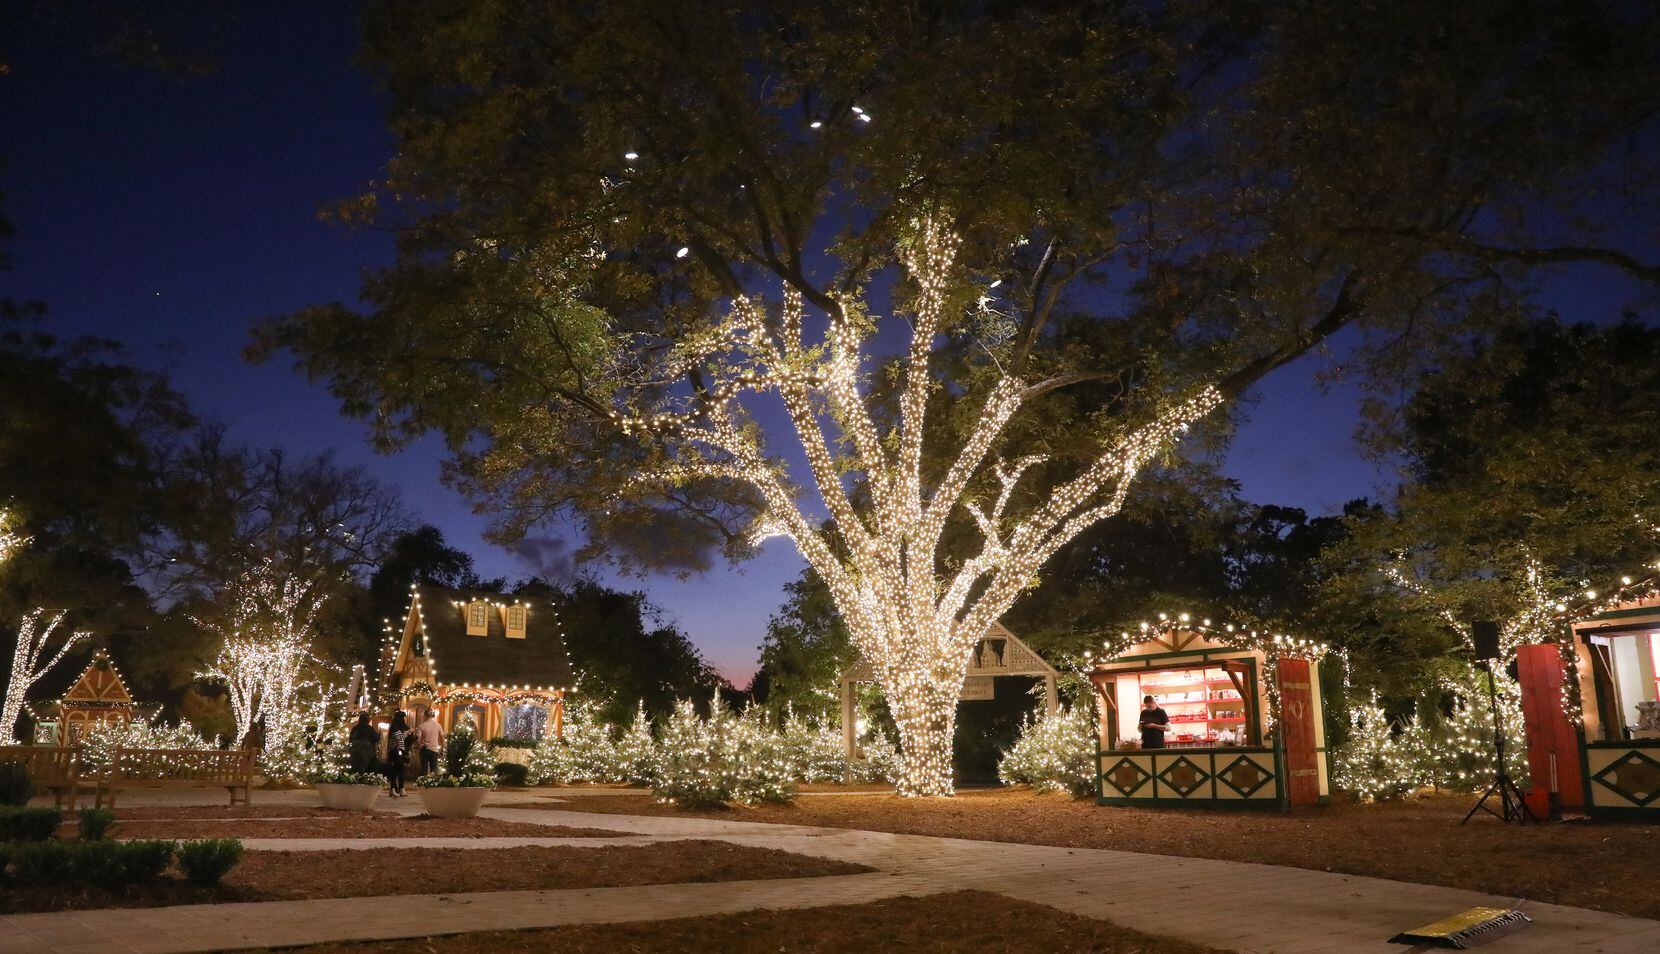 The lights at the Christmas Village turned on for the first night of the Dallas Arboretum's...